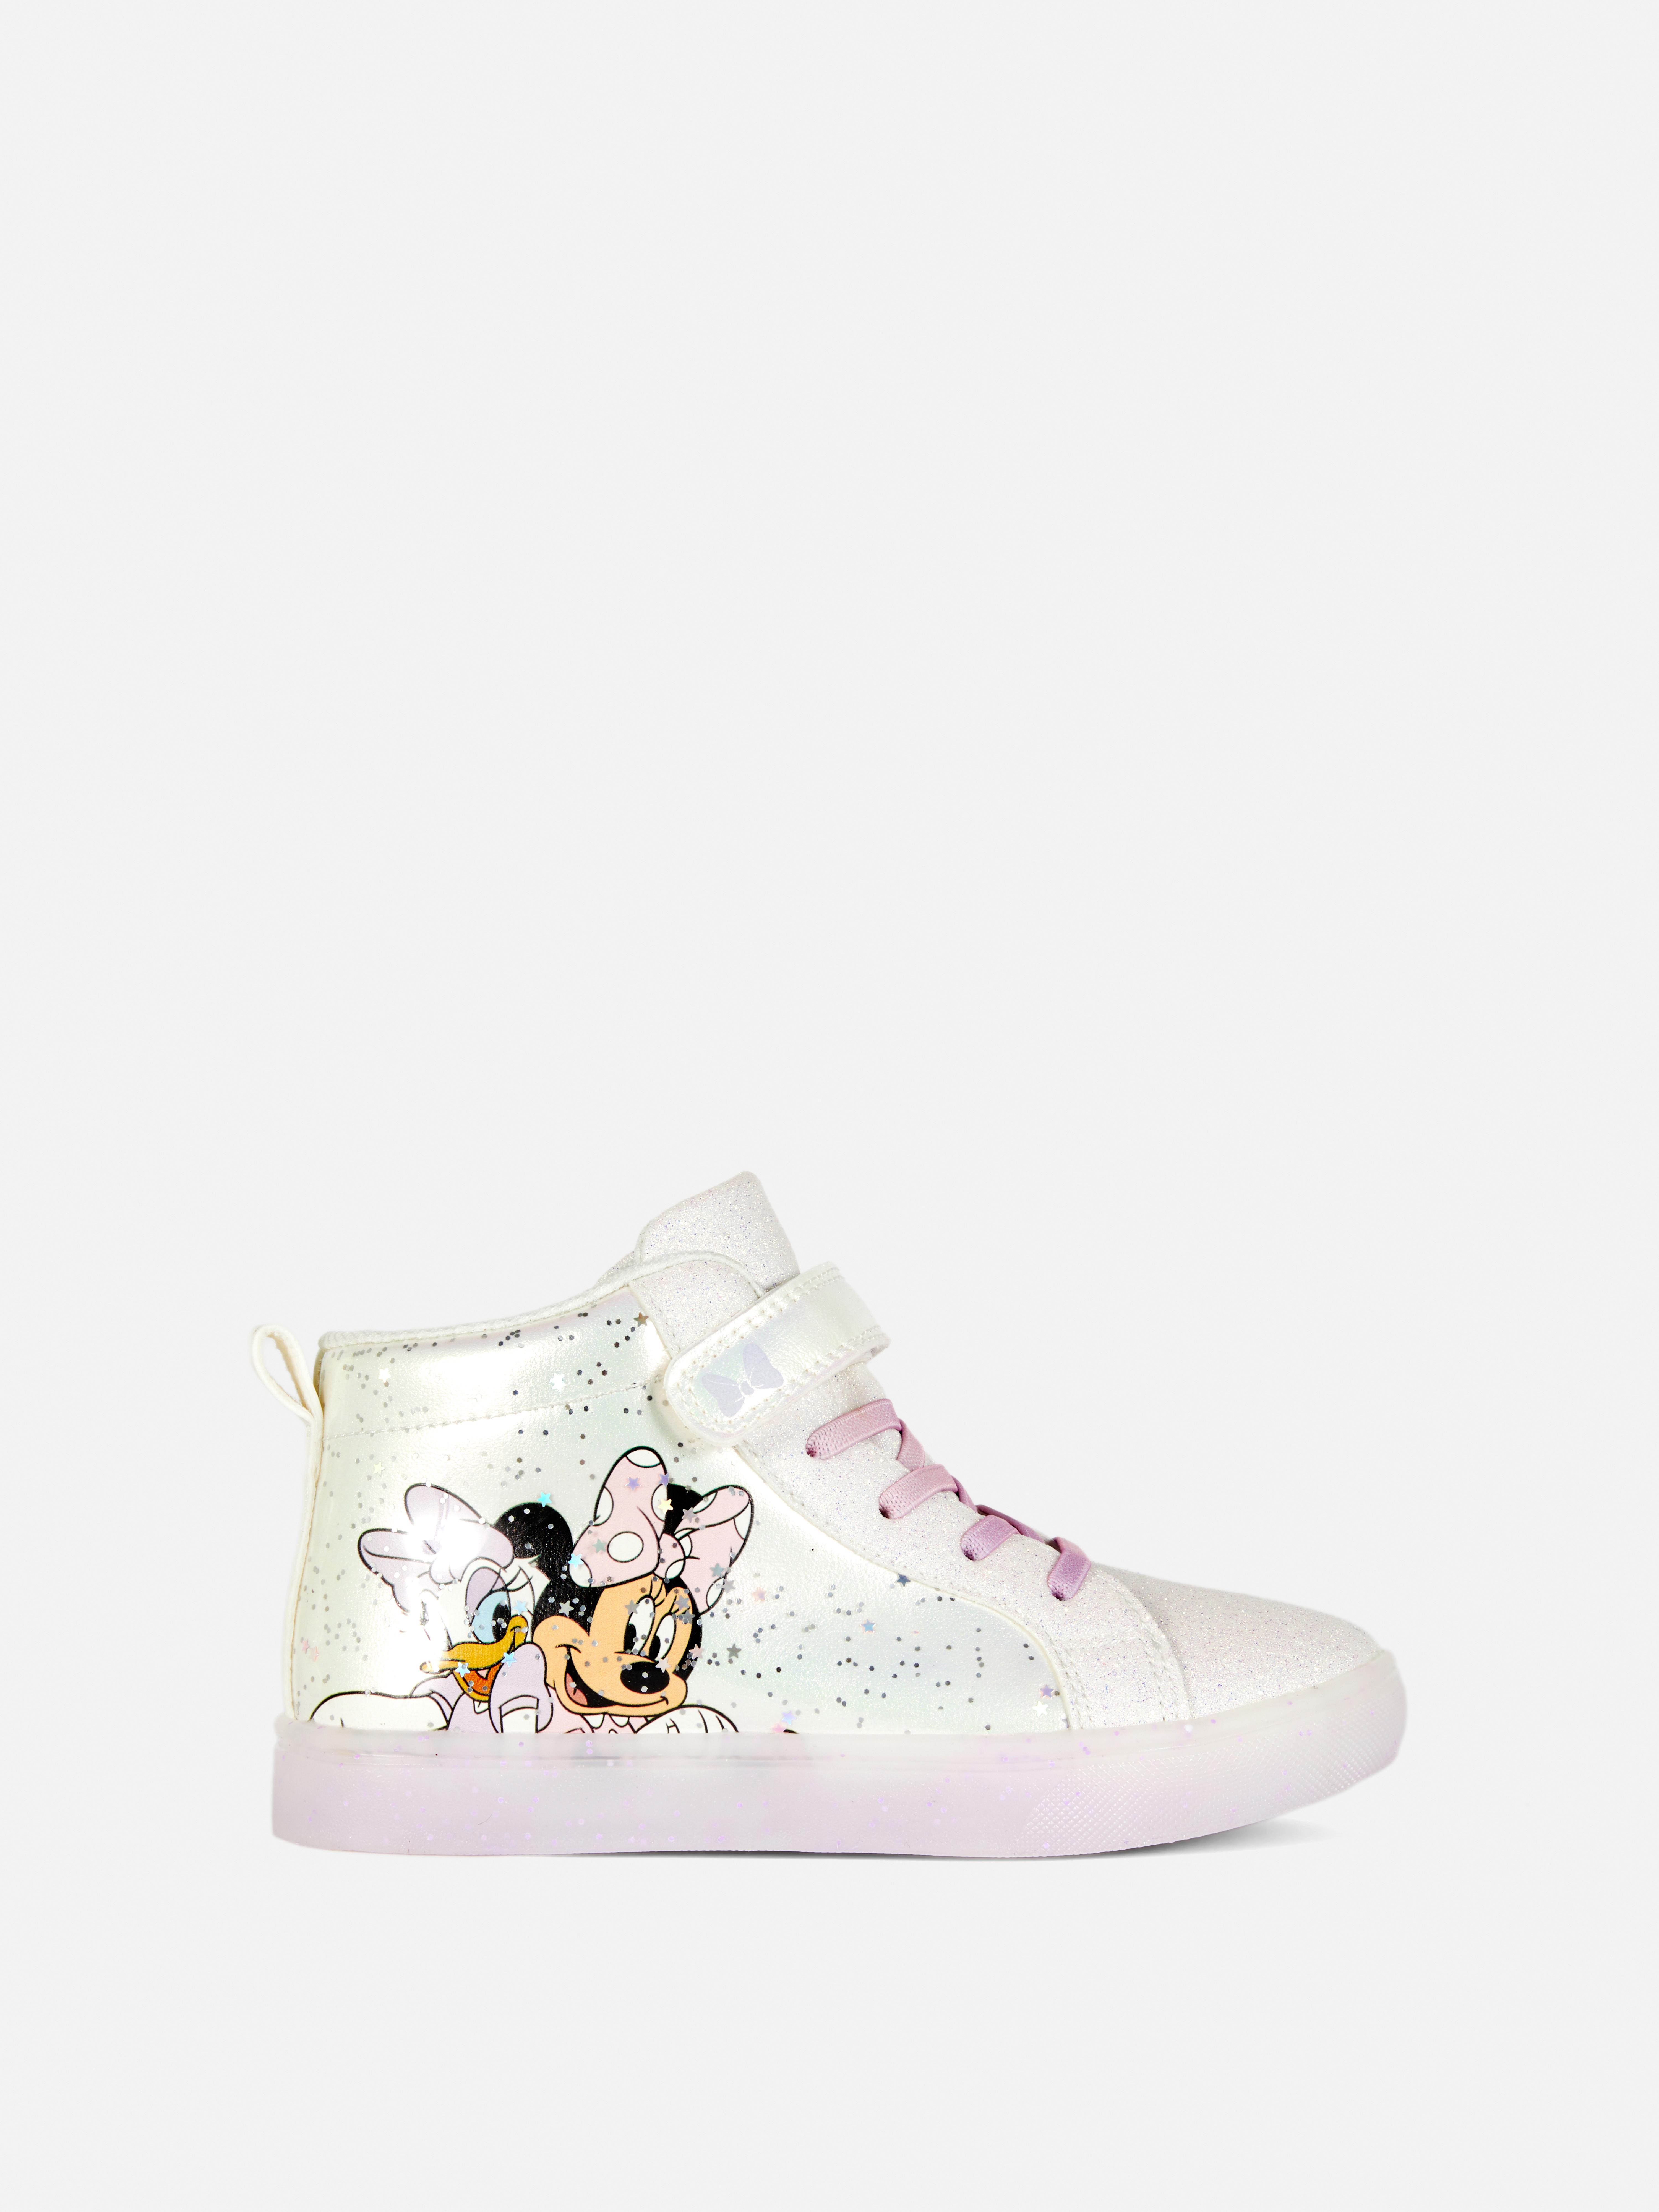 Disney’s Minnie Mouse and Daisy Duck Light Up Trainers